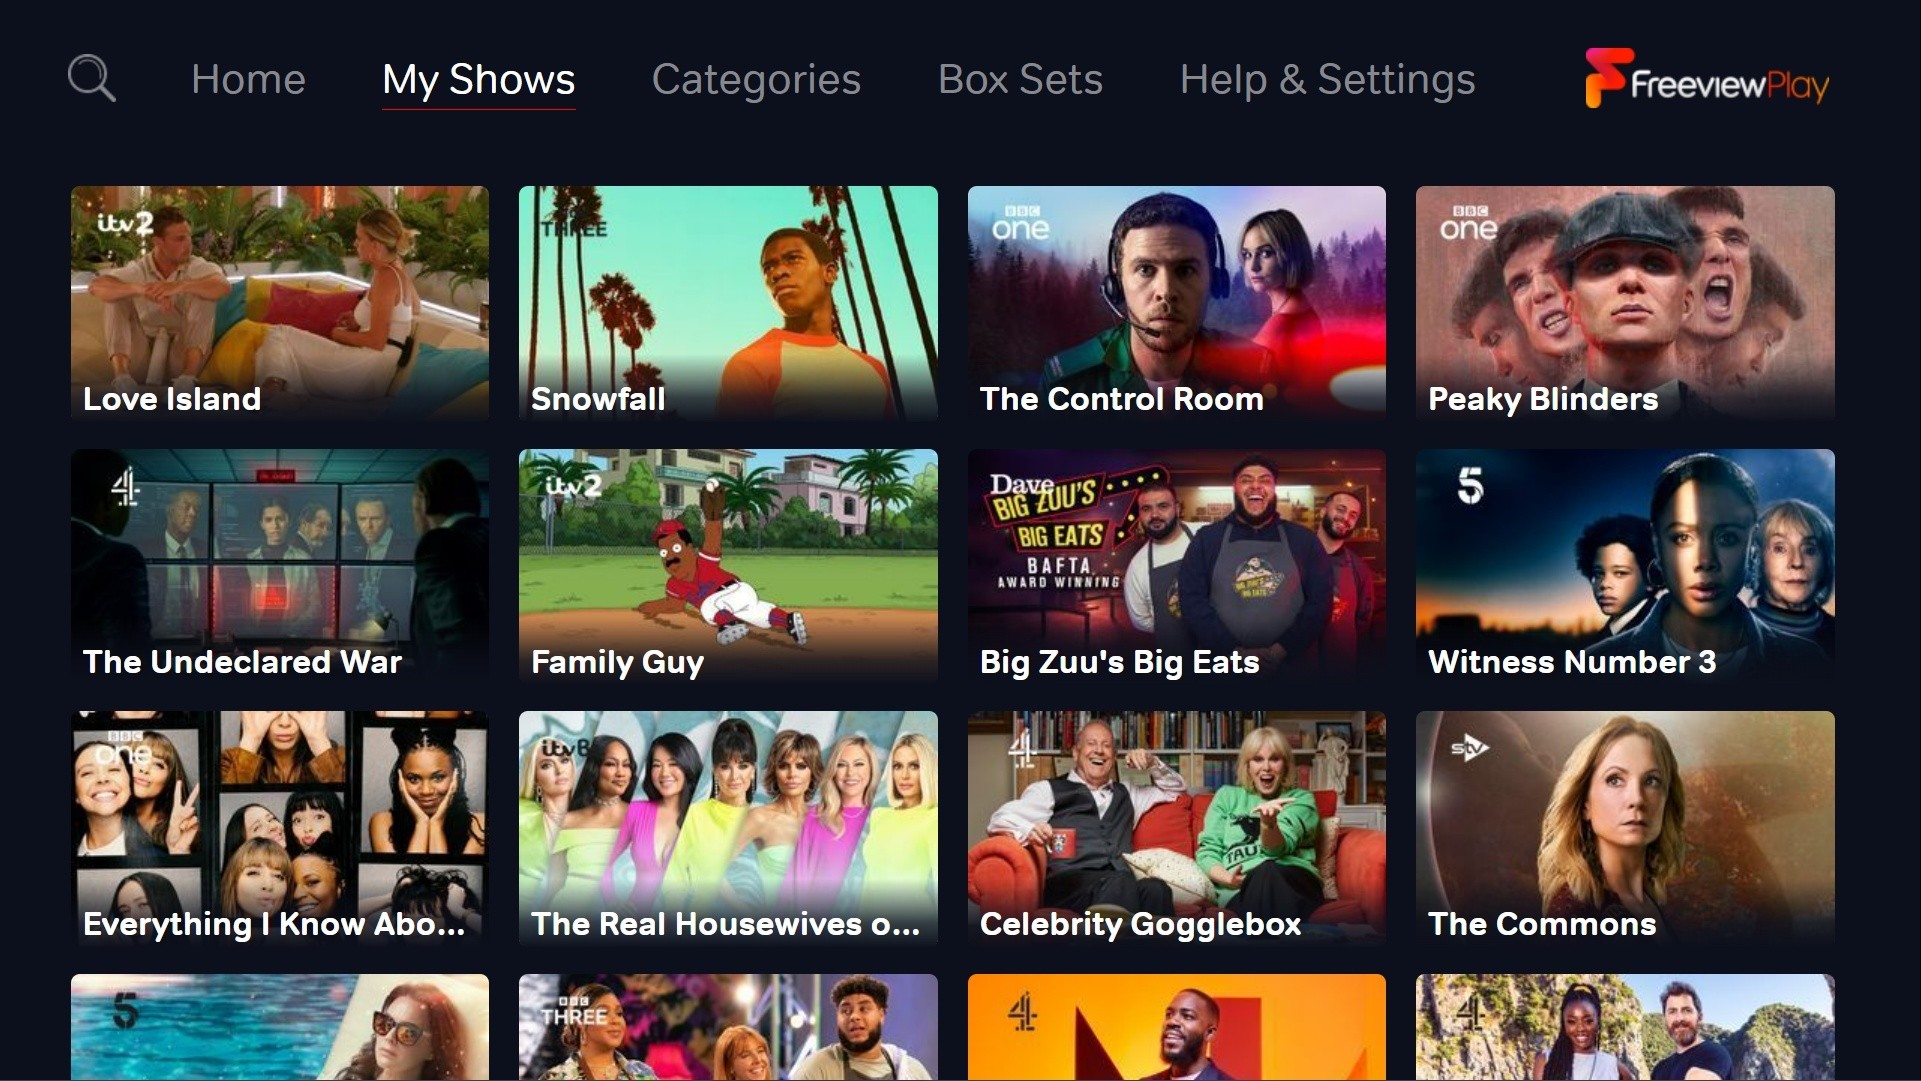 Explore freeview play - My Shows